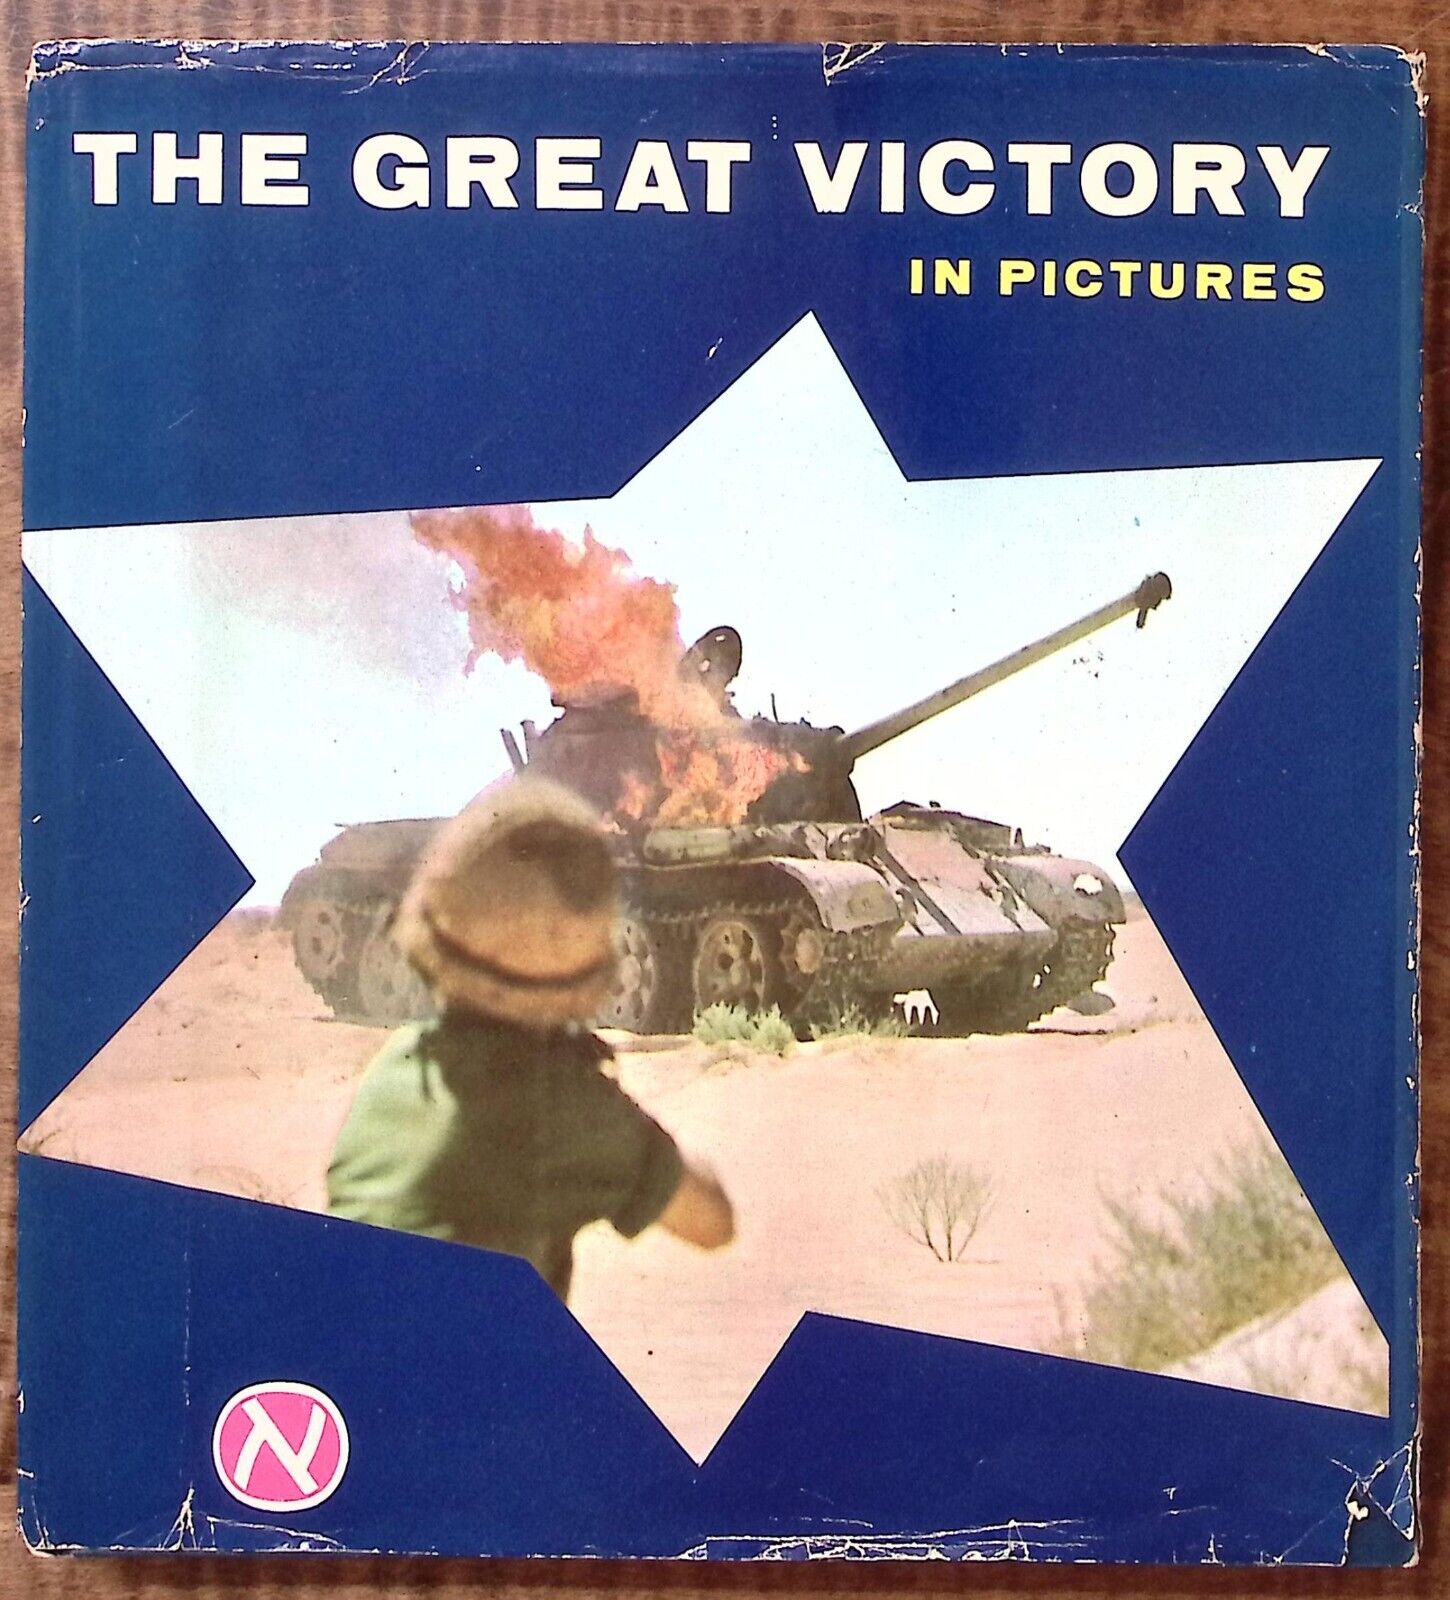 1967 ISRAEL THE GREAT VICTORY IN PICTURES HCDJ HEBREW ENGLISH TEXT B377